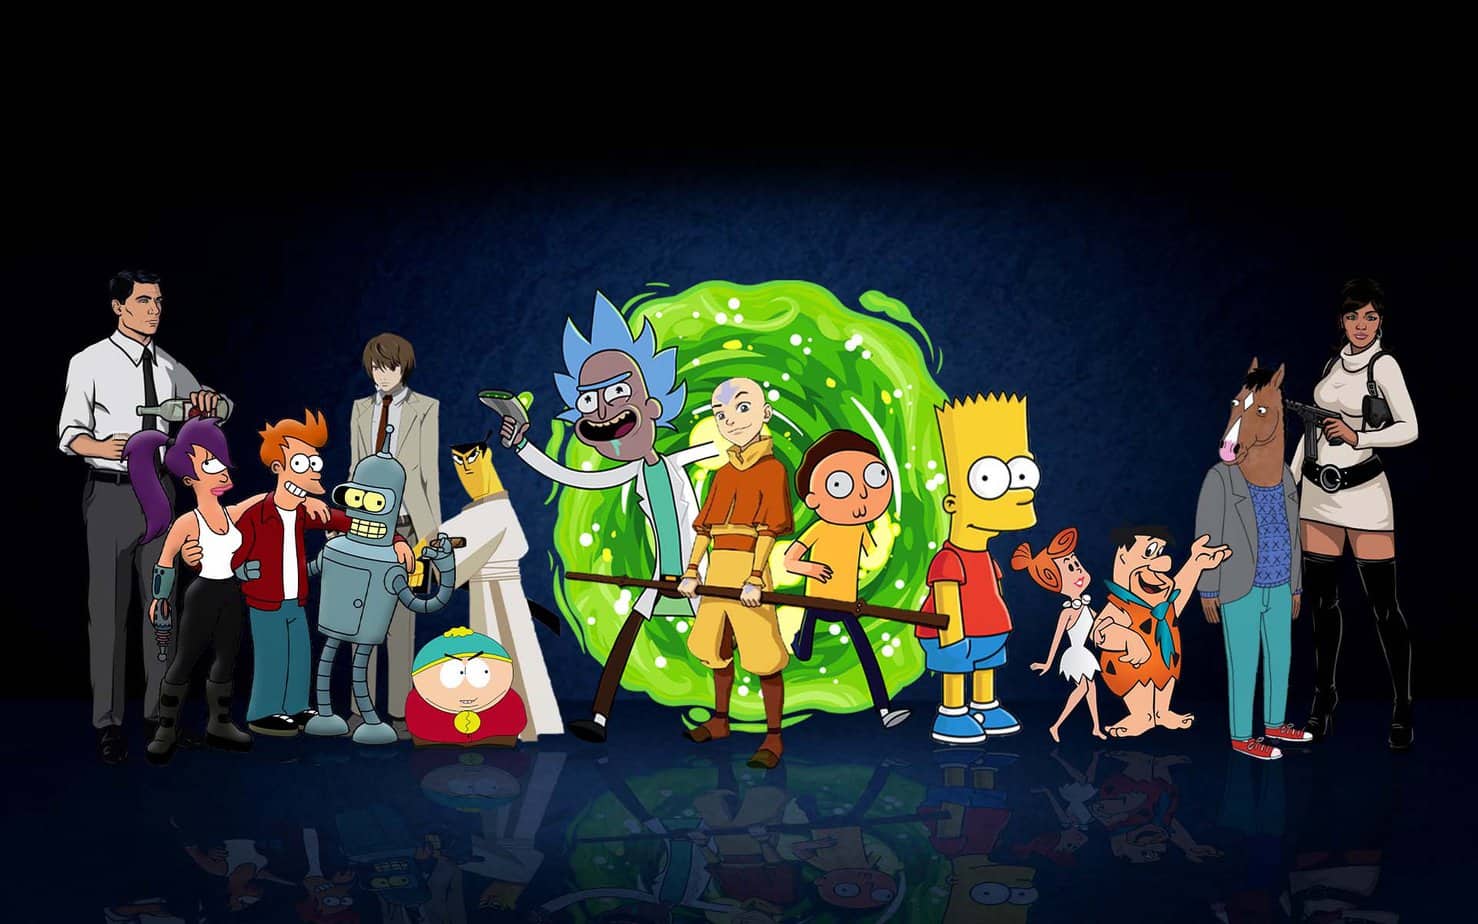 10 BEST ANIMATED SHOWS TO MAKE YOU LAUGH - These selections will make you forget all about being upset